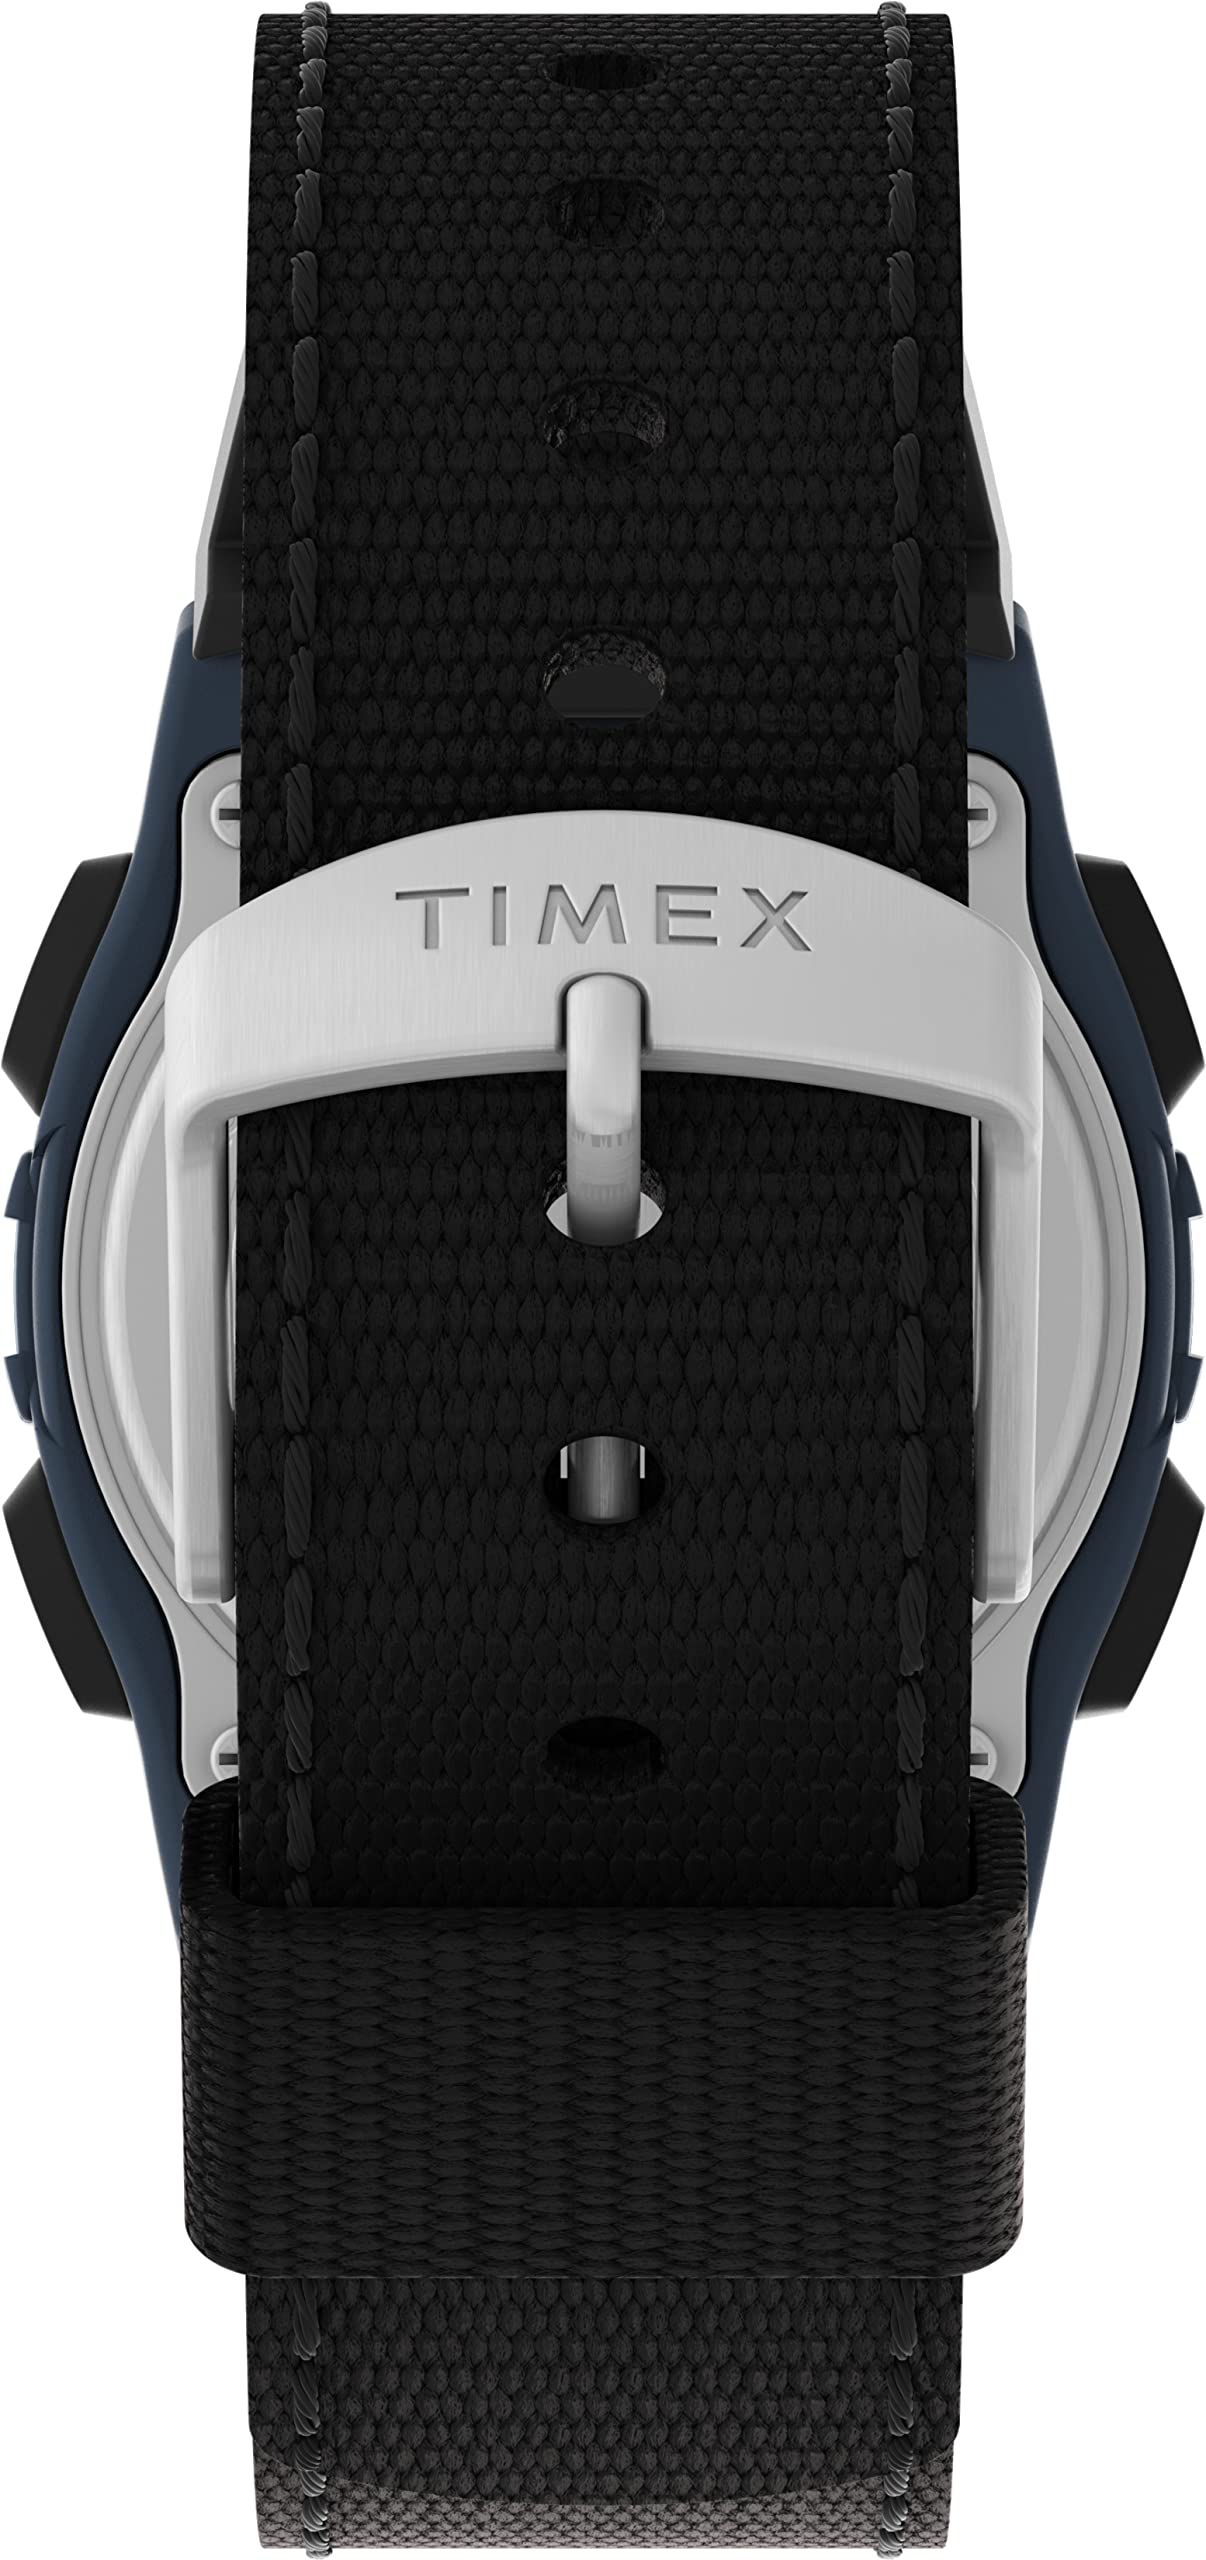 Timex Unisex Expedition CAT Midsize Watch